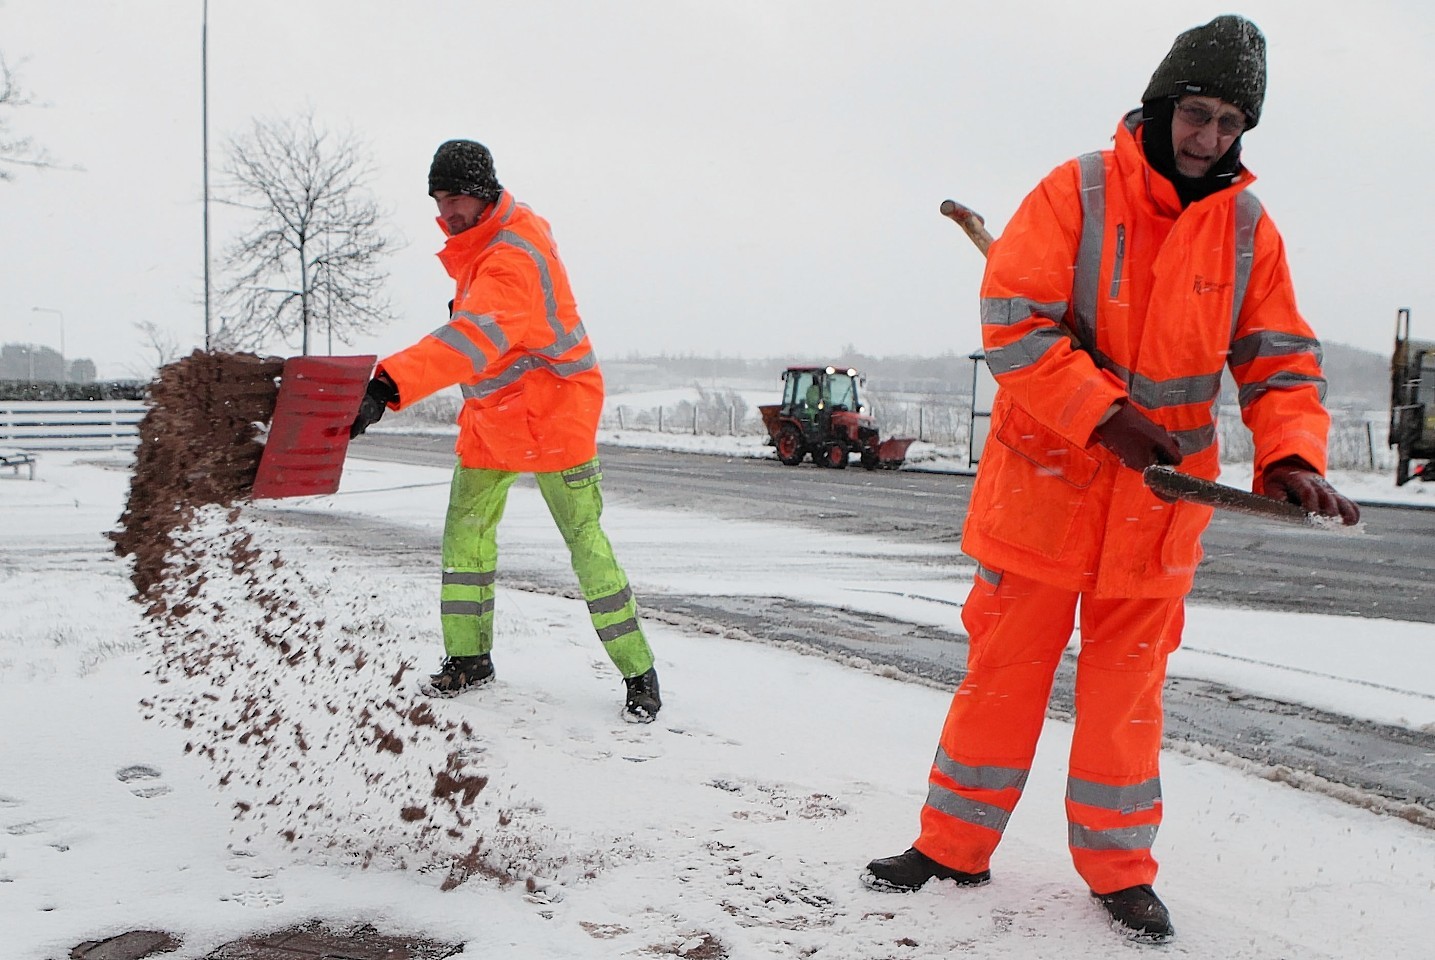 In West Lothian, people have been hard at work clearing the roads